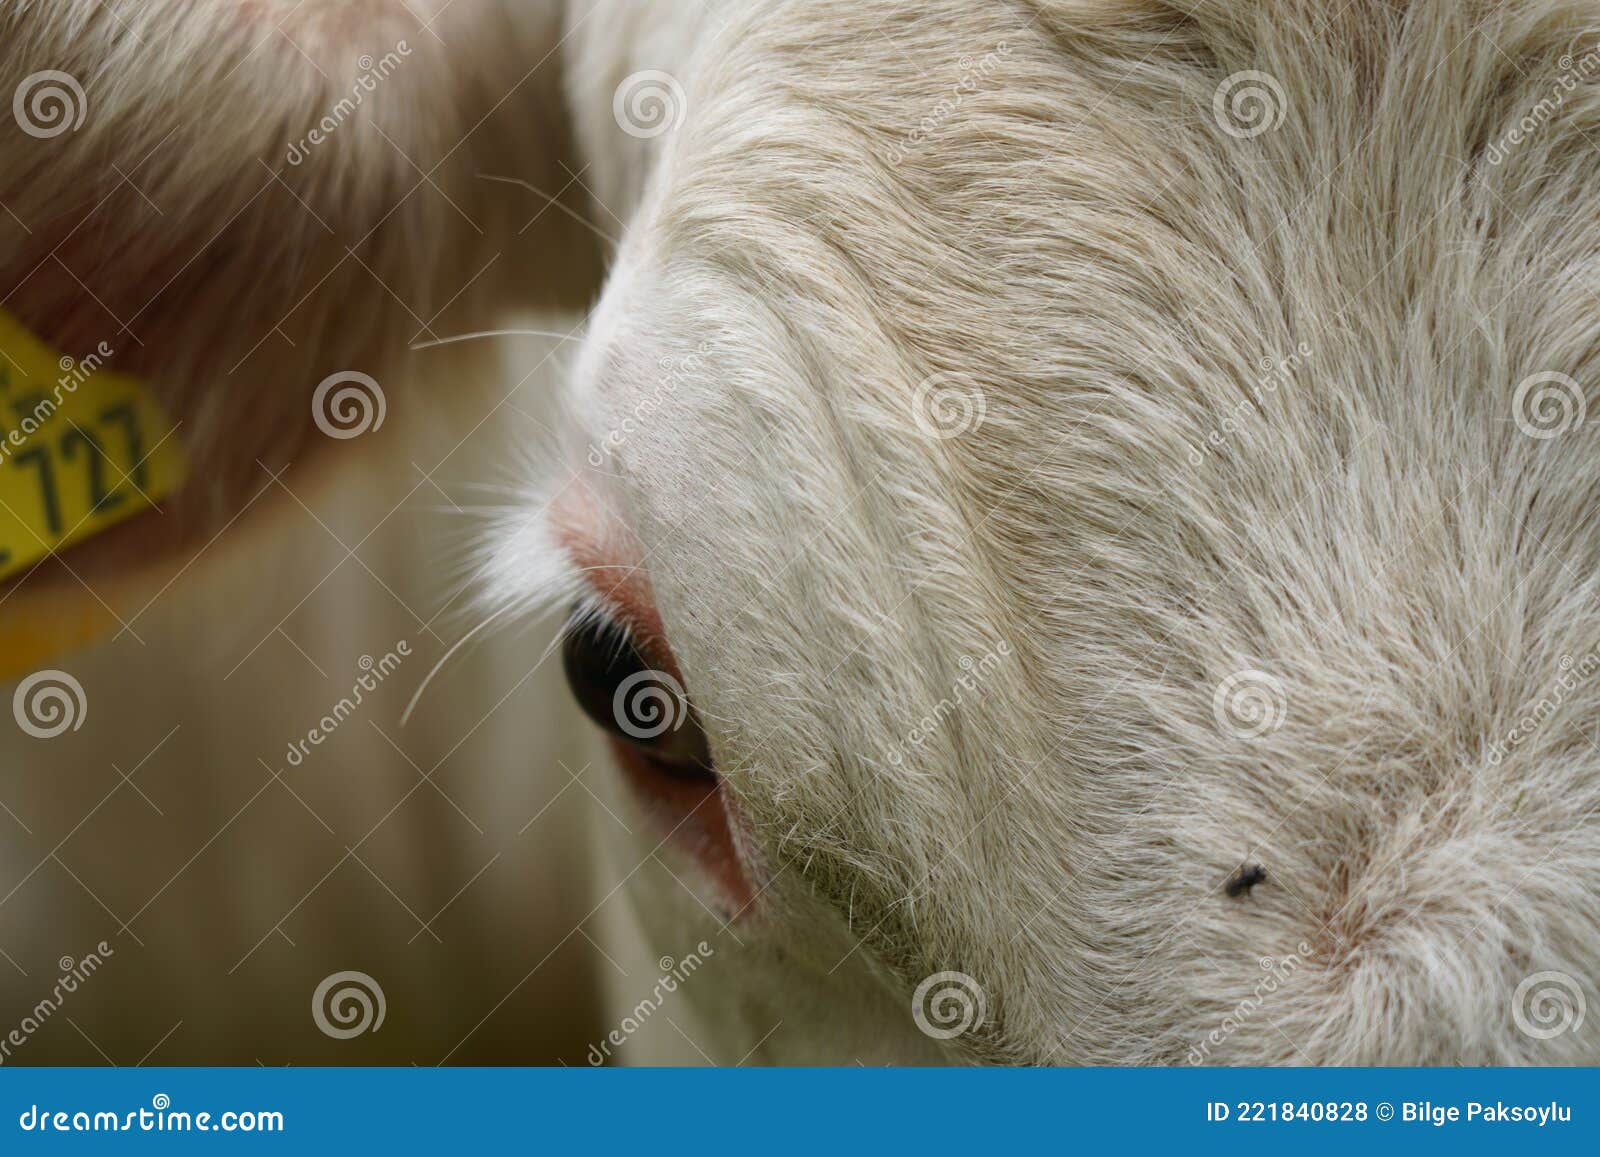 white cow portrait with one eye and fur